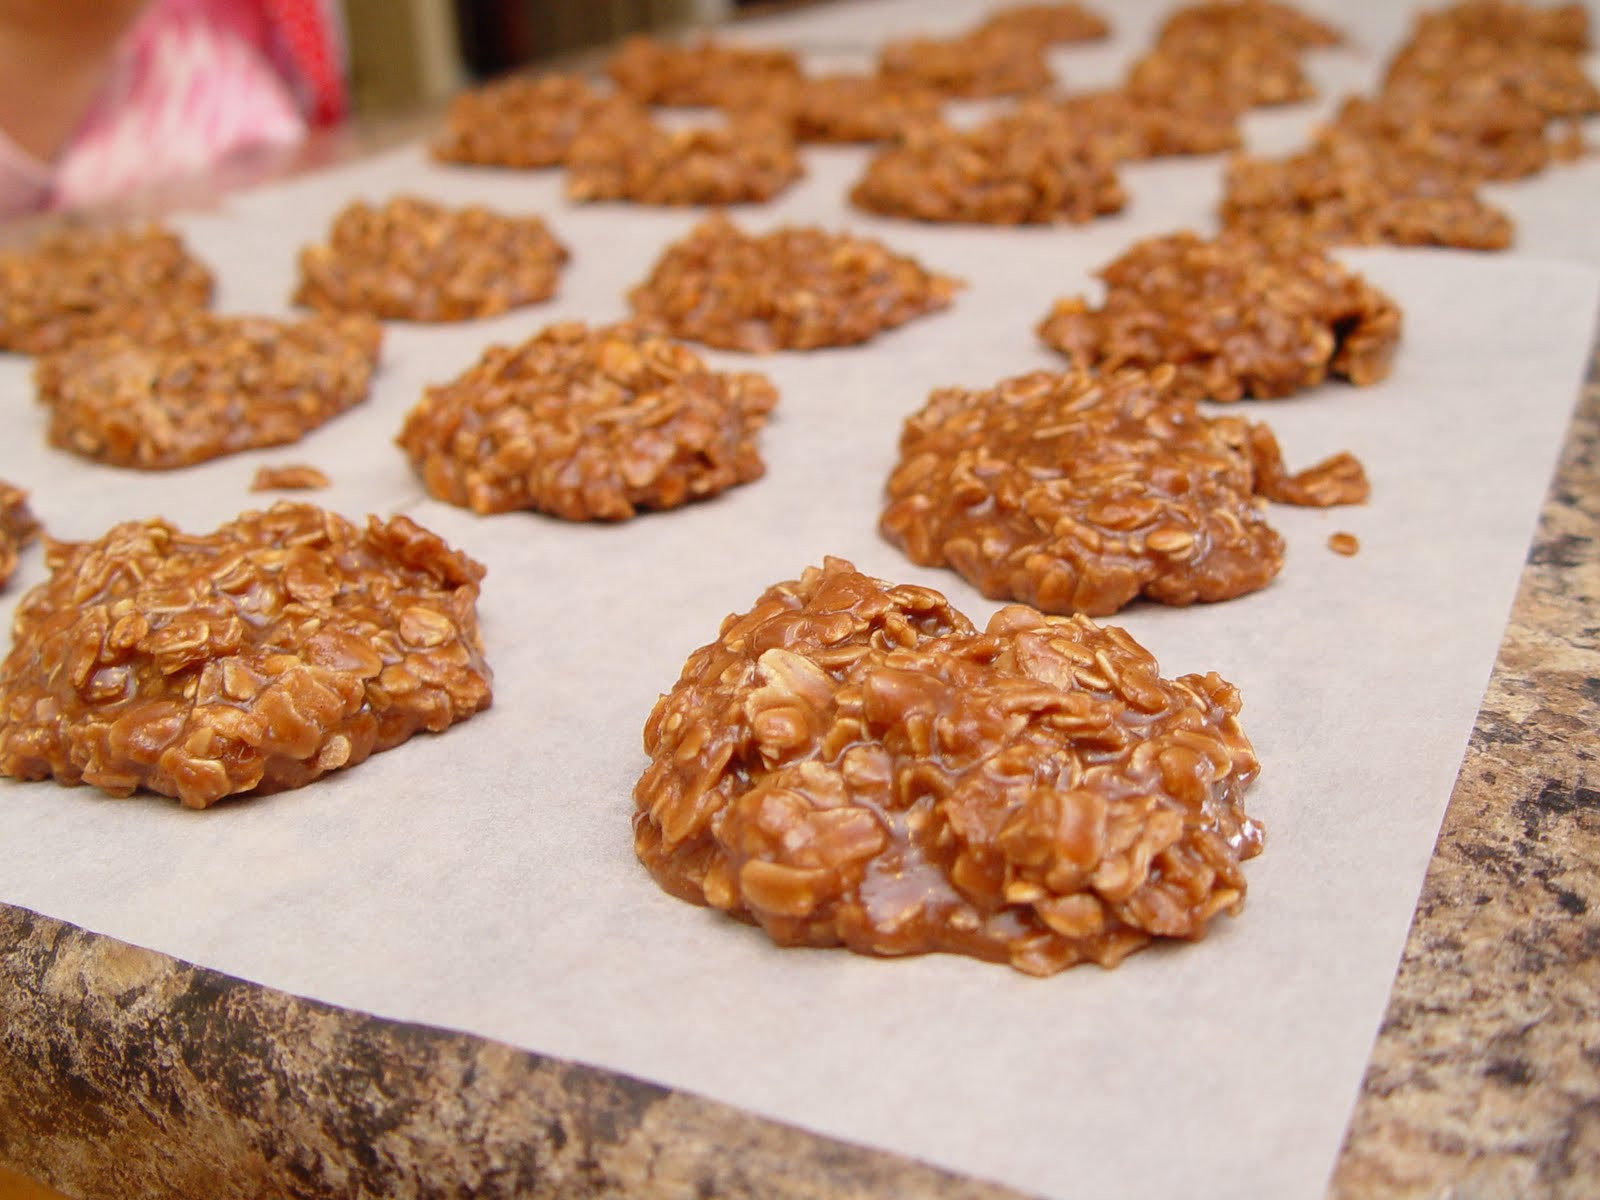 No Bake Cookies With Peanut Butter
 No Bake Chocolate Peanut Butter Cookies